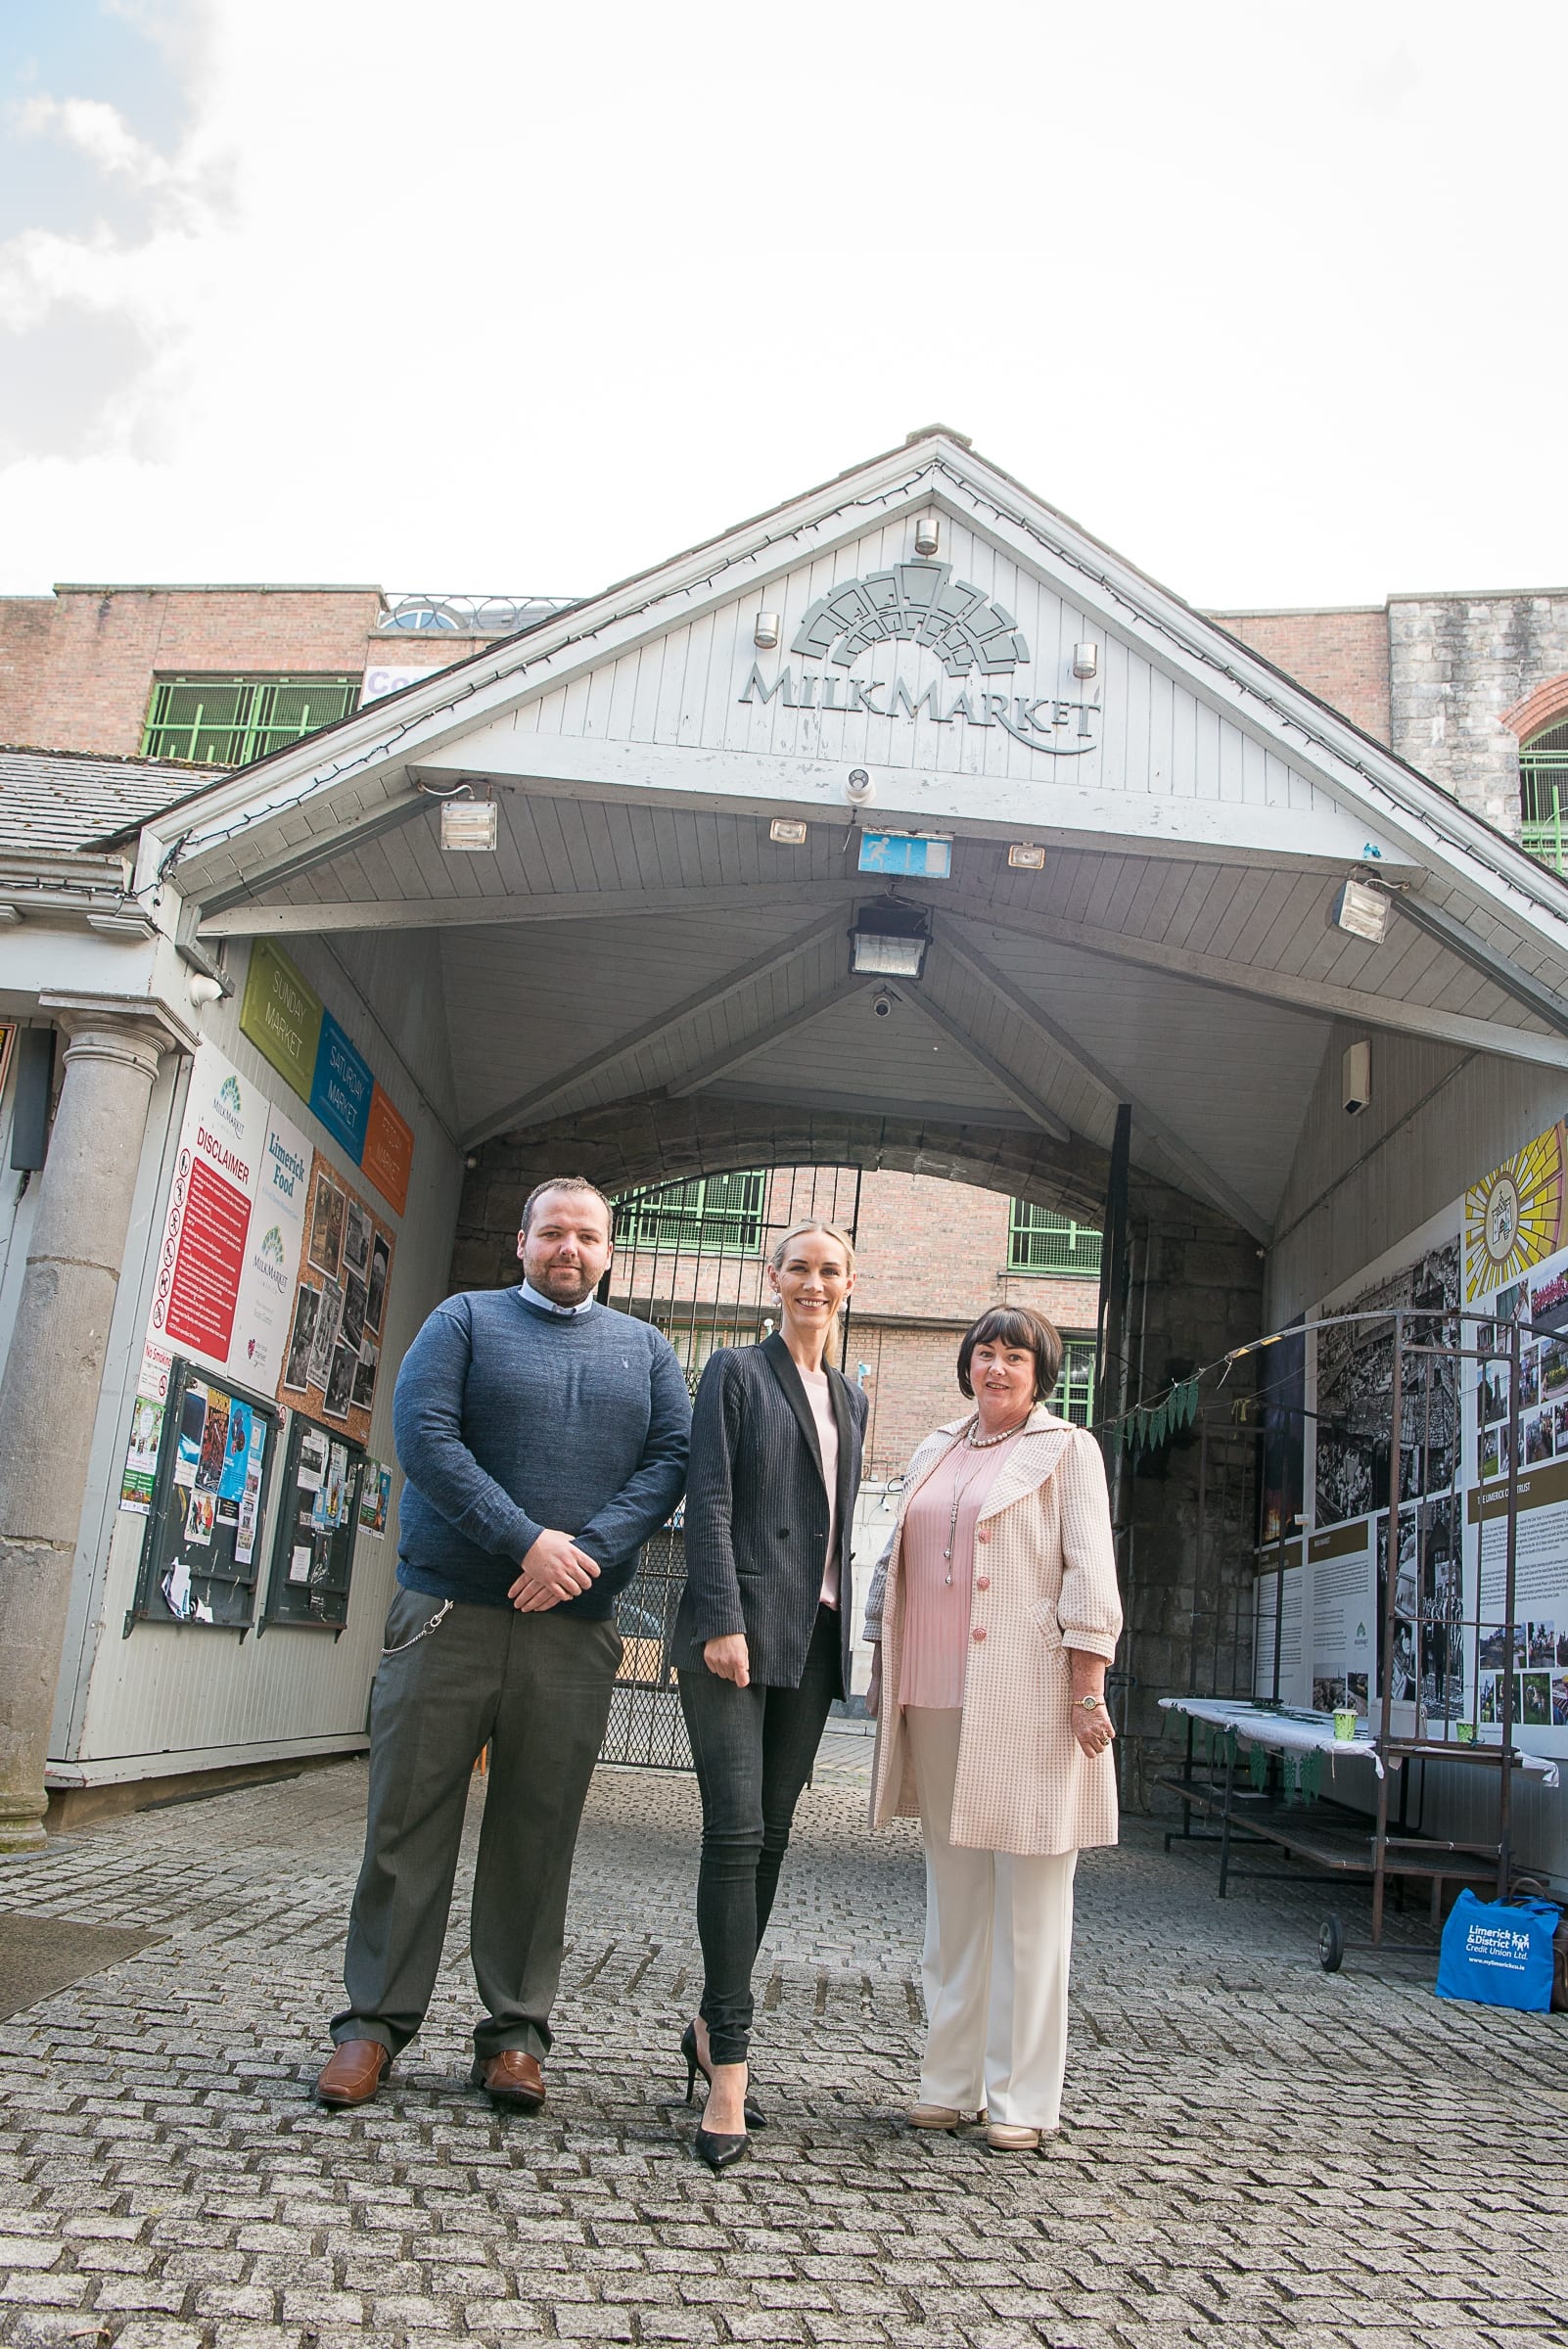 From Left to Right:  Regional Leaders BBQ which took place on the 6th June in the Limerick Milk Market: Dave Fitzgerald - Milk Market, Dee Ryan - CEO Limerick Chamber, Caroline Long - CEO/  - Limerick and  District Credit Union, 
Photo by Morning Star Photography